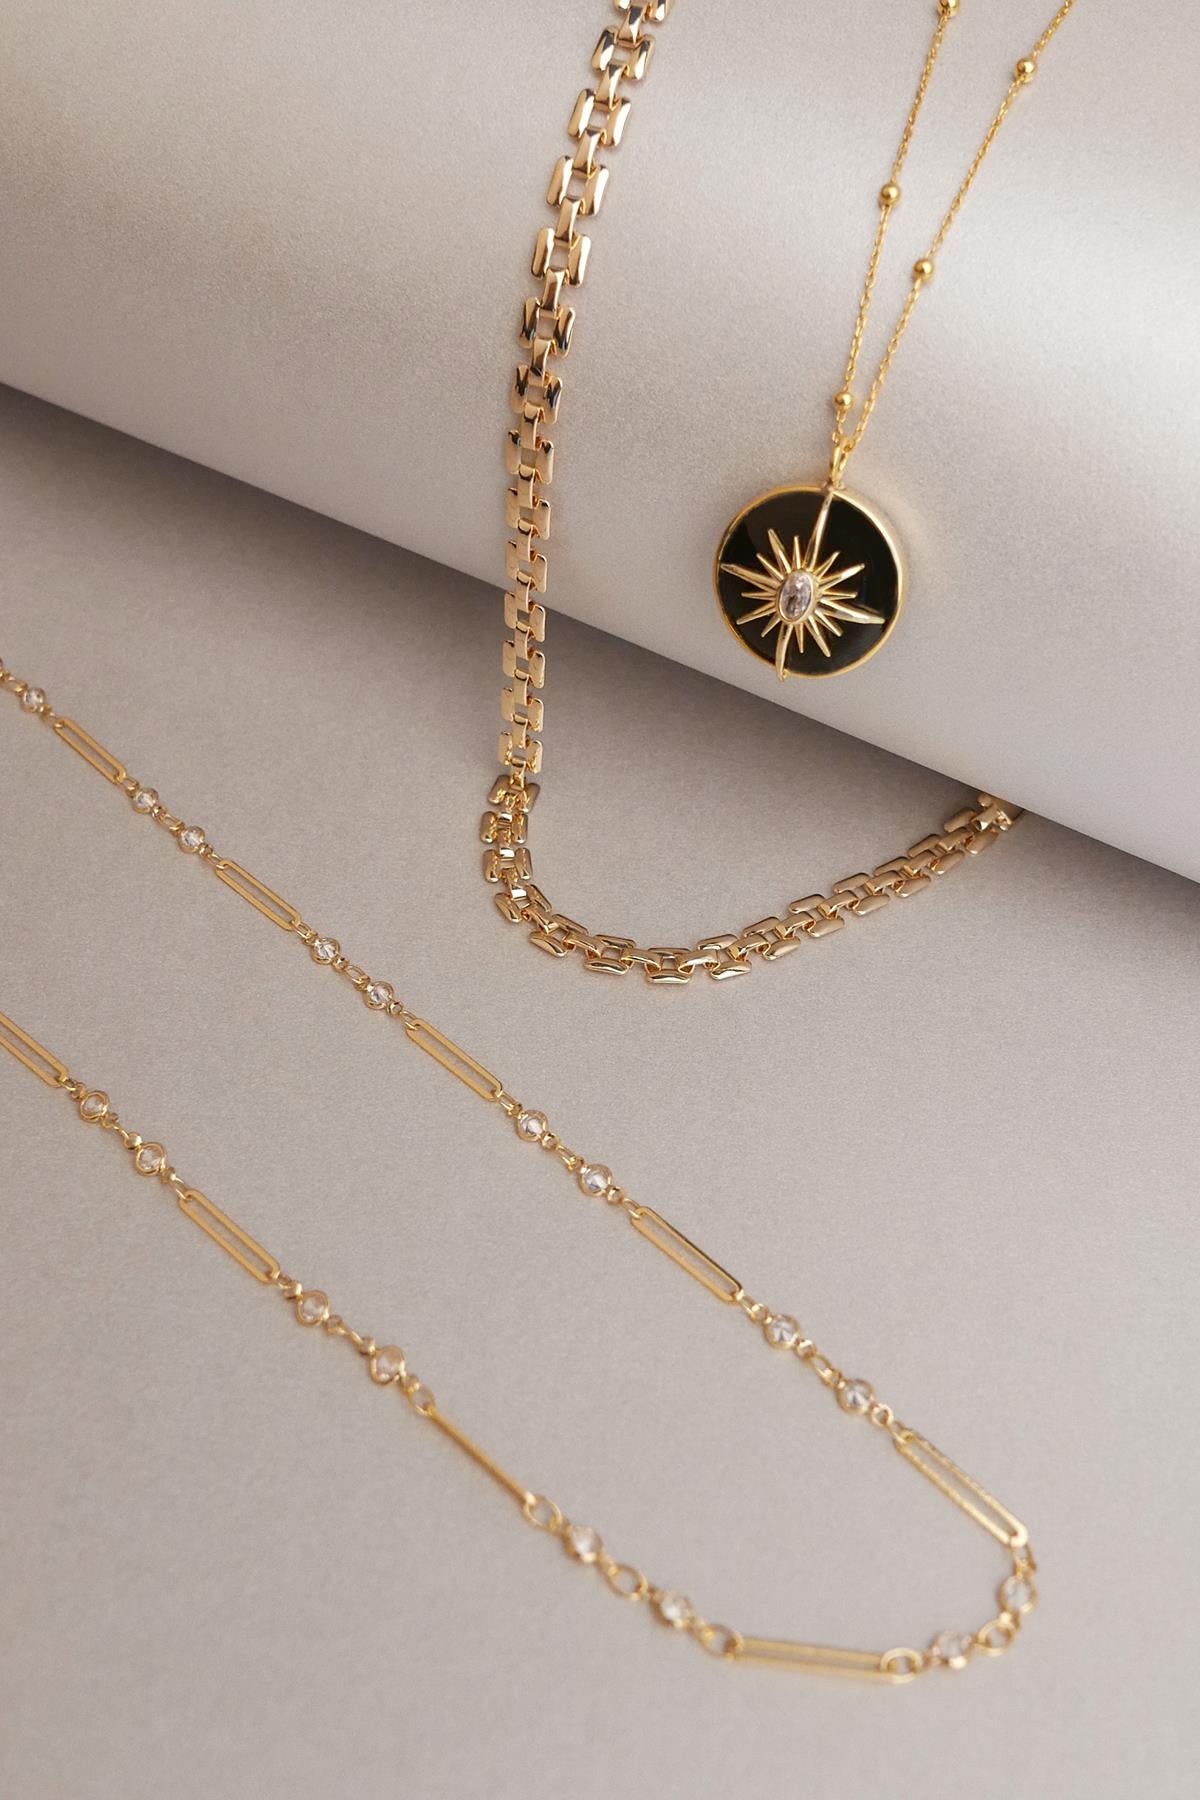 Zircon Chain Necklace Gold Plated